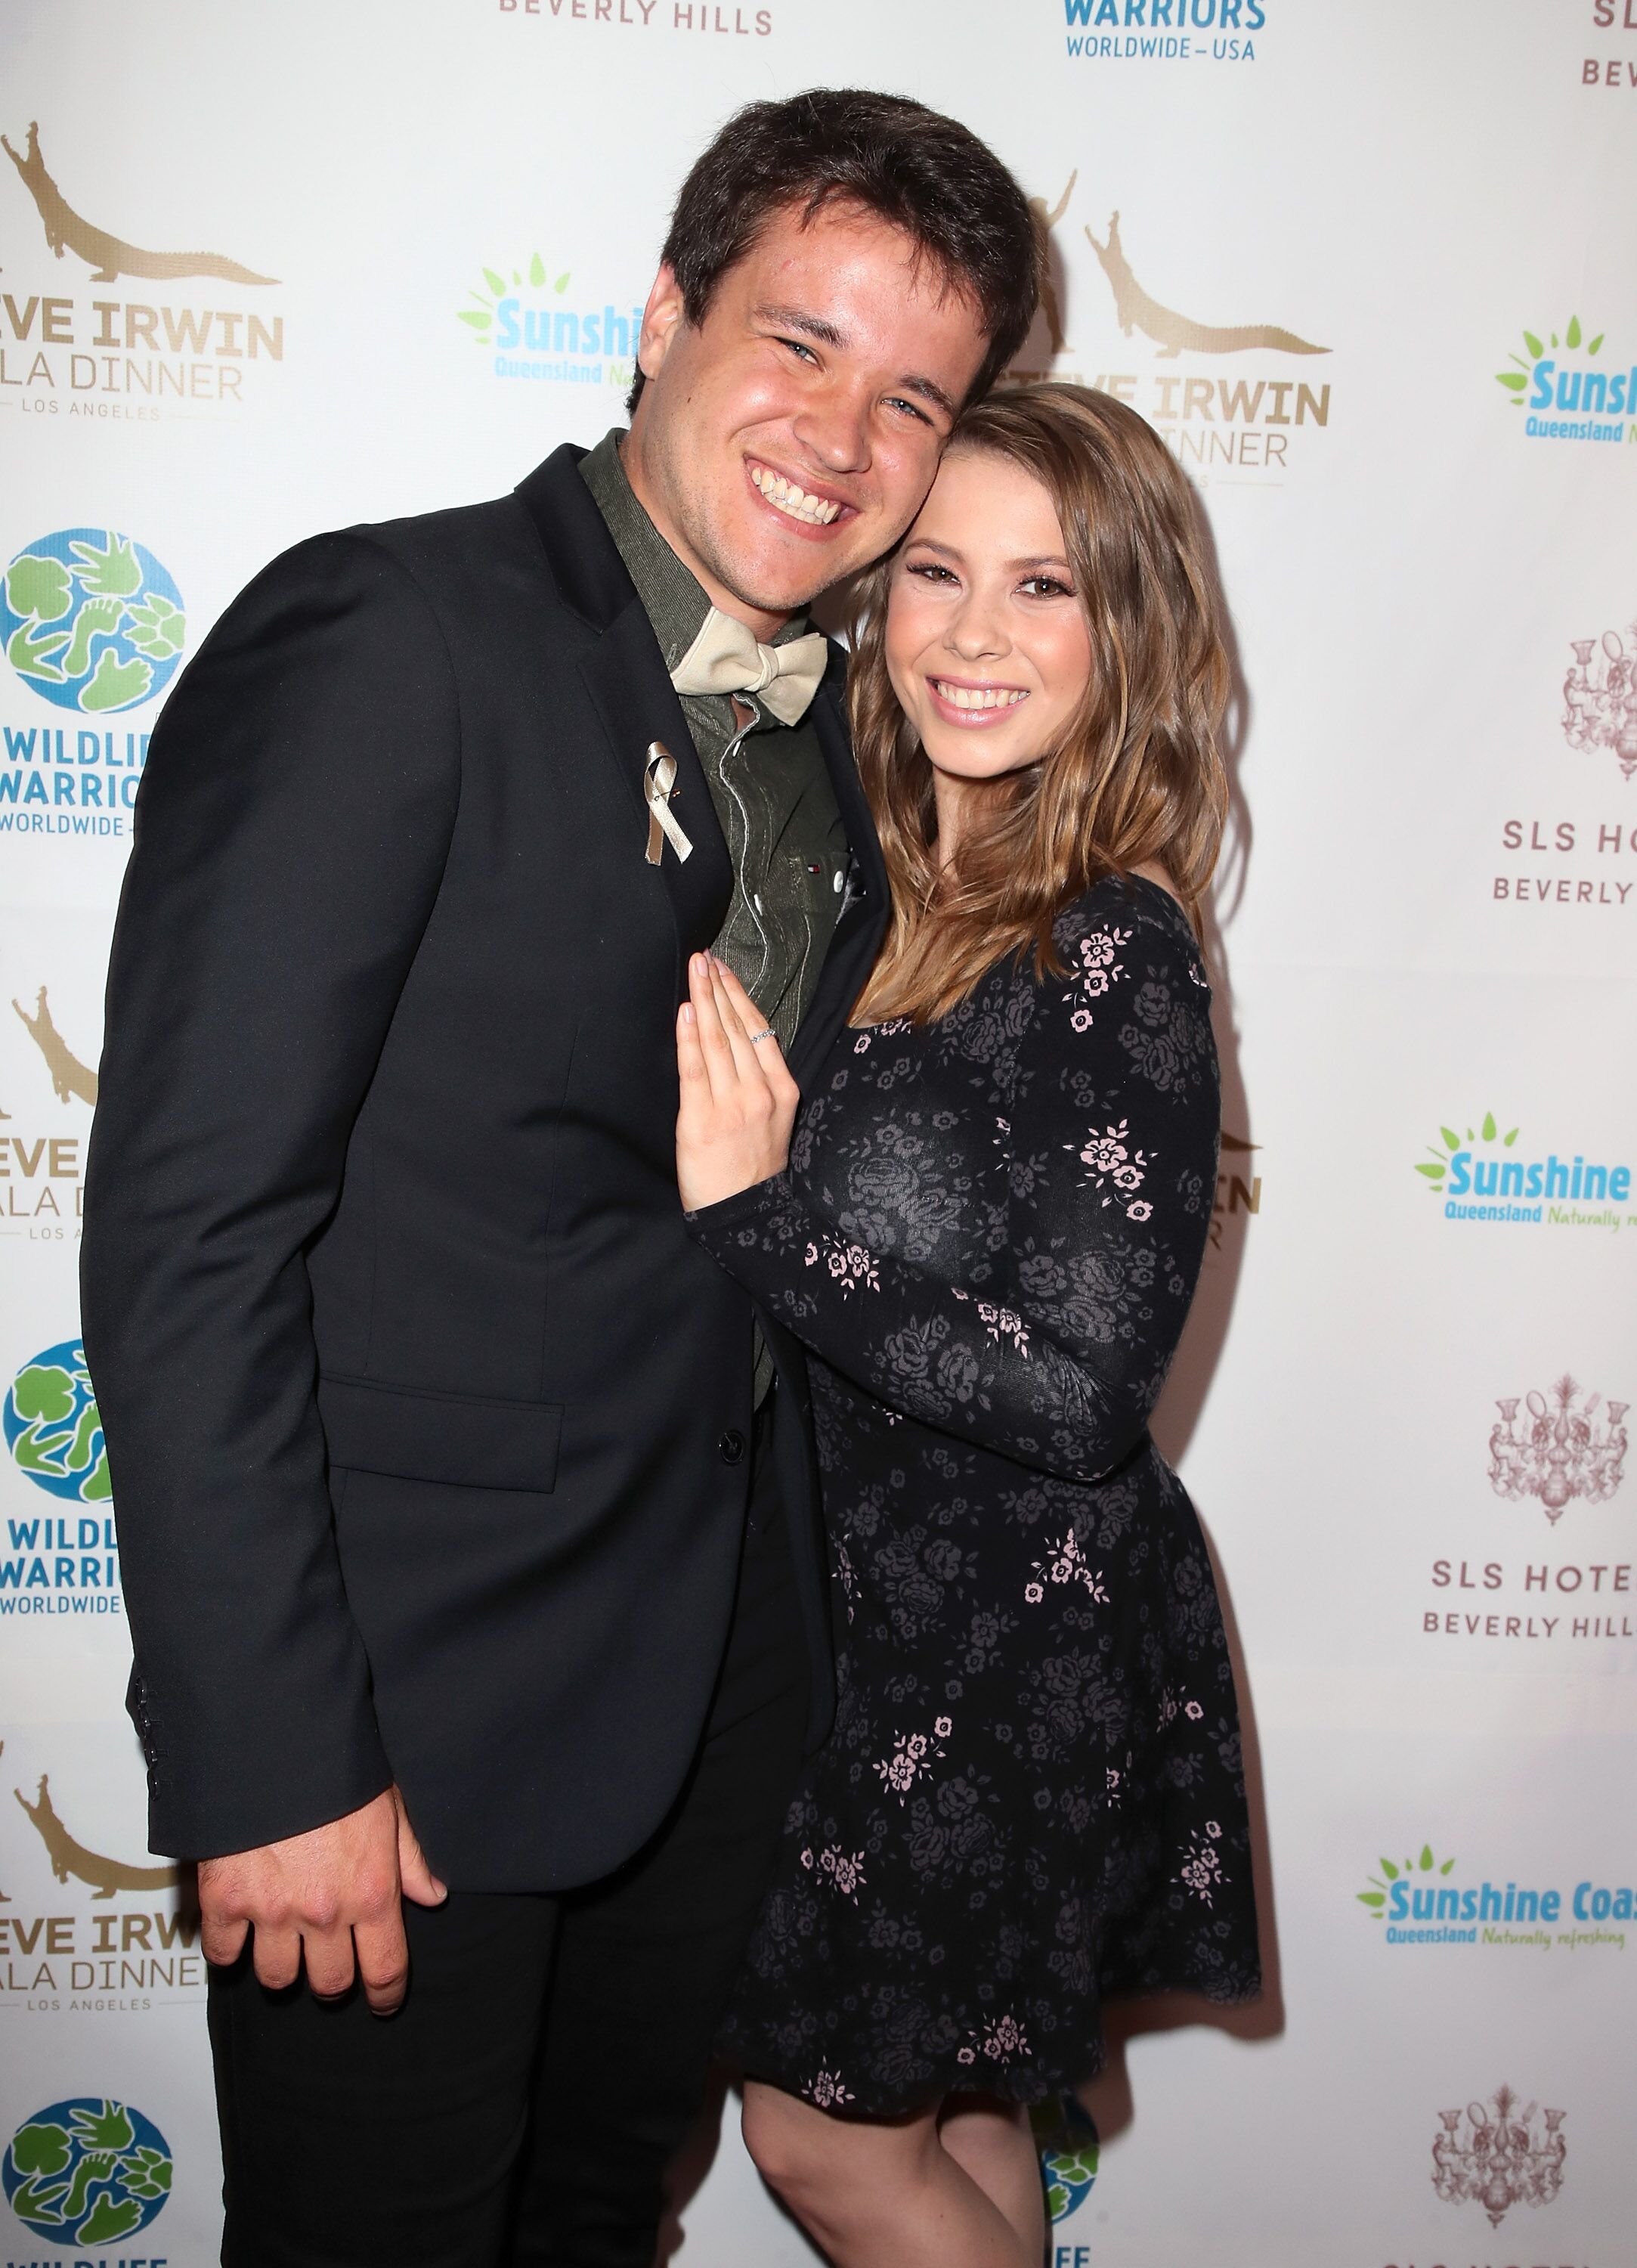 Bindi Irwin and Chandler Powell at the Steve Irwin Gala Dinner. | Source: Getty Images